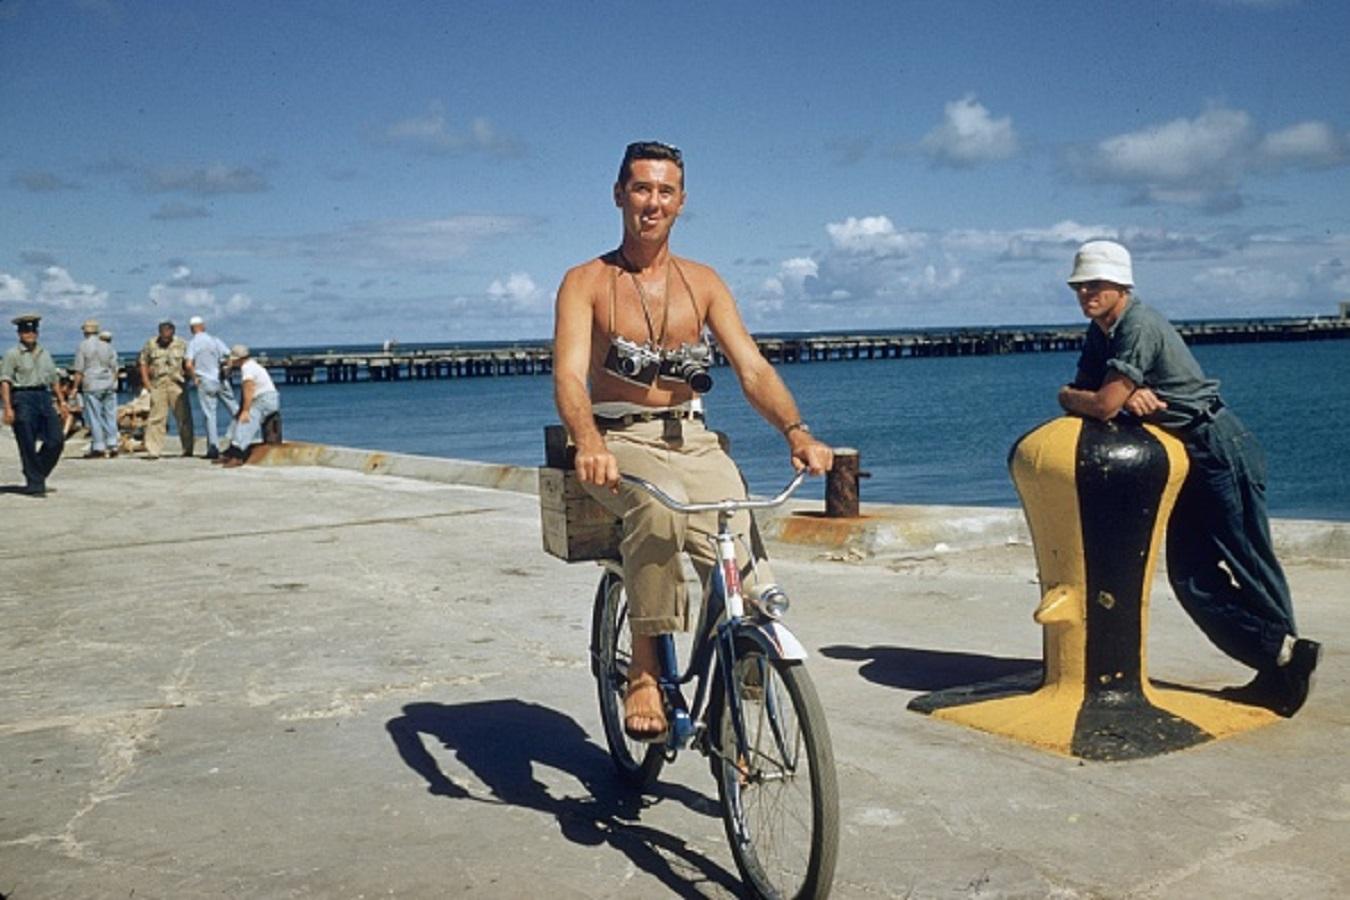 'Its A Hard Life' 1985 Slim Aarons Limited Estate Edition Print 

Photographer Slim Aarons riding a bike along the quayside with cameras slung round his neck during the filming of 'Mister Roberts' in Hawaii.

Produced from the original